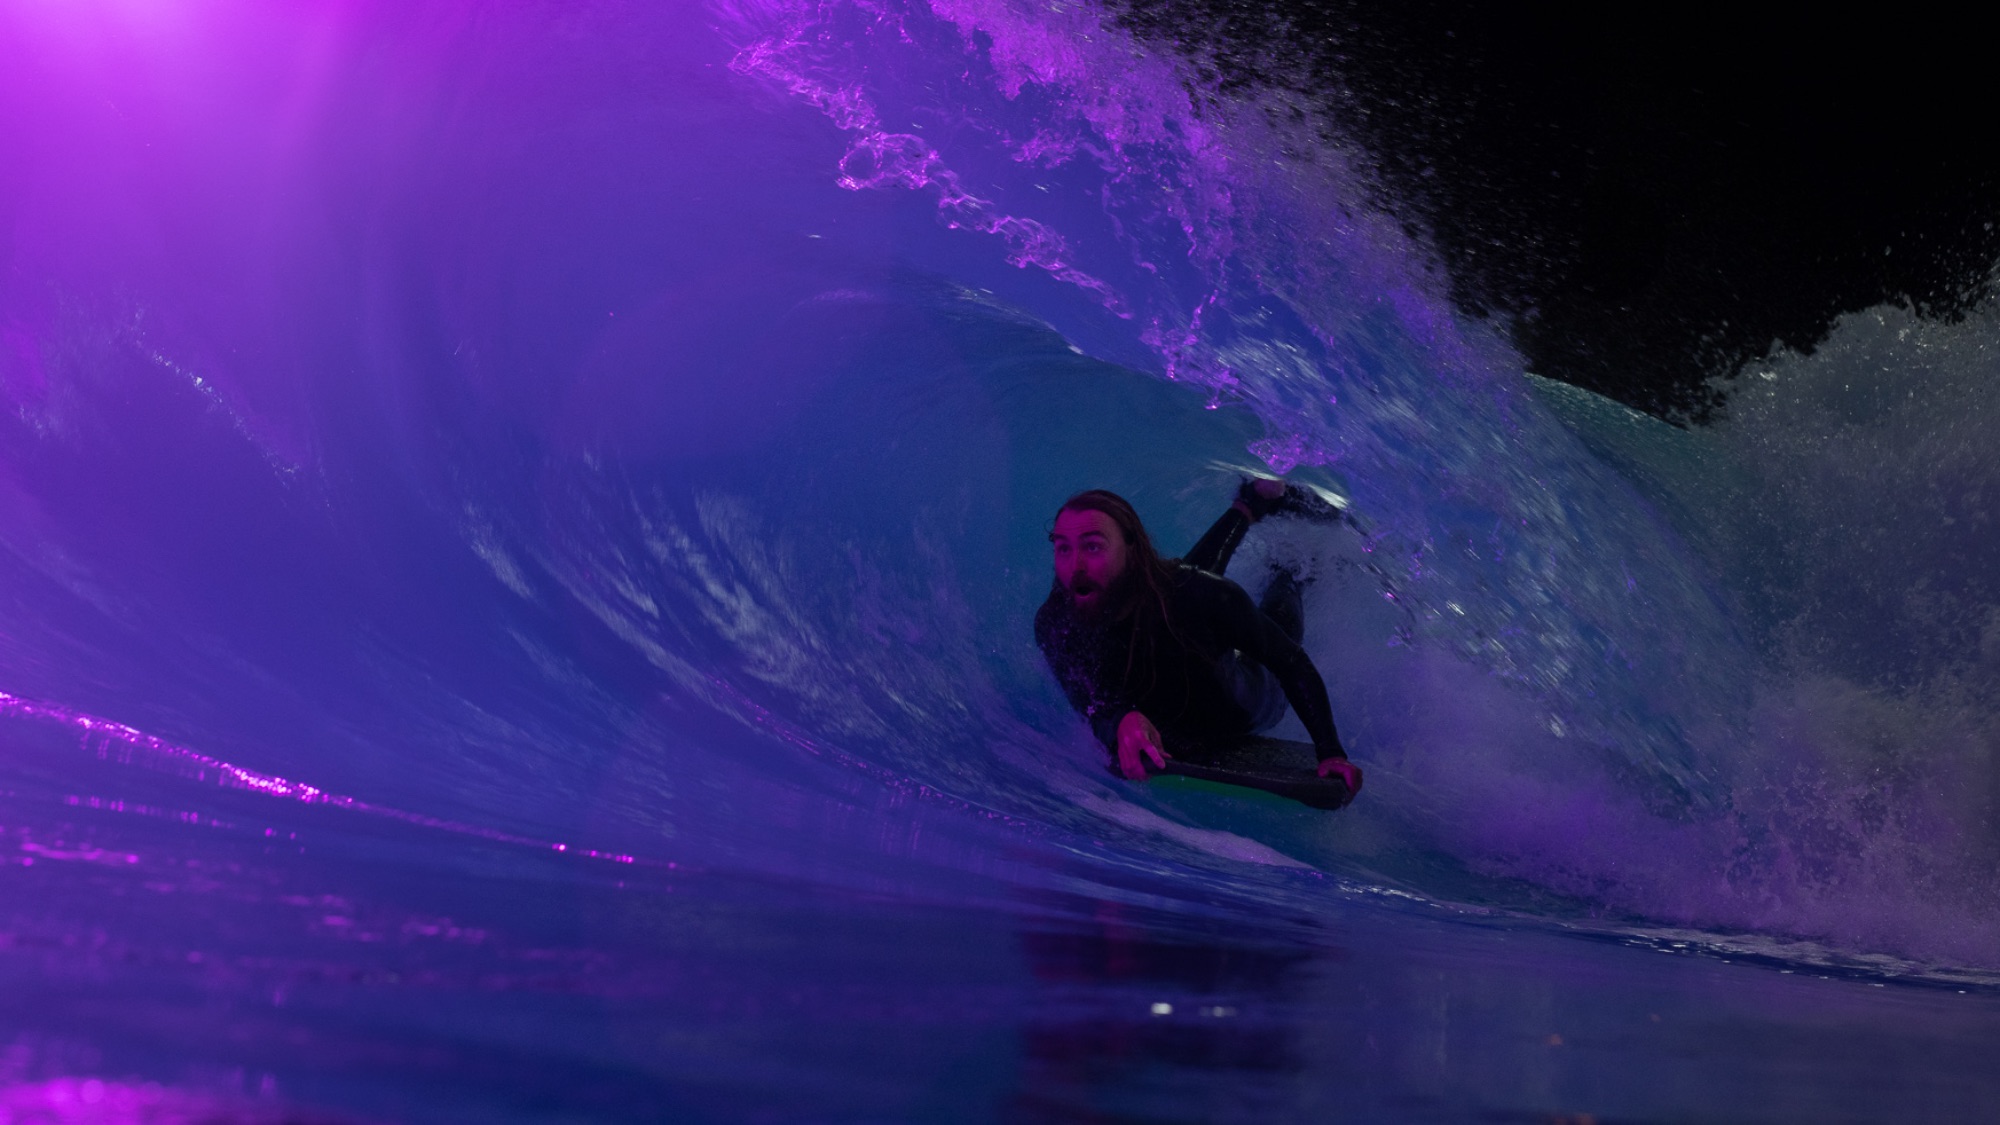 wave pool night surf photography